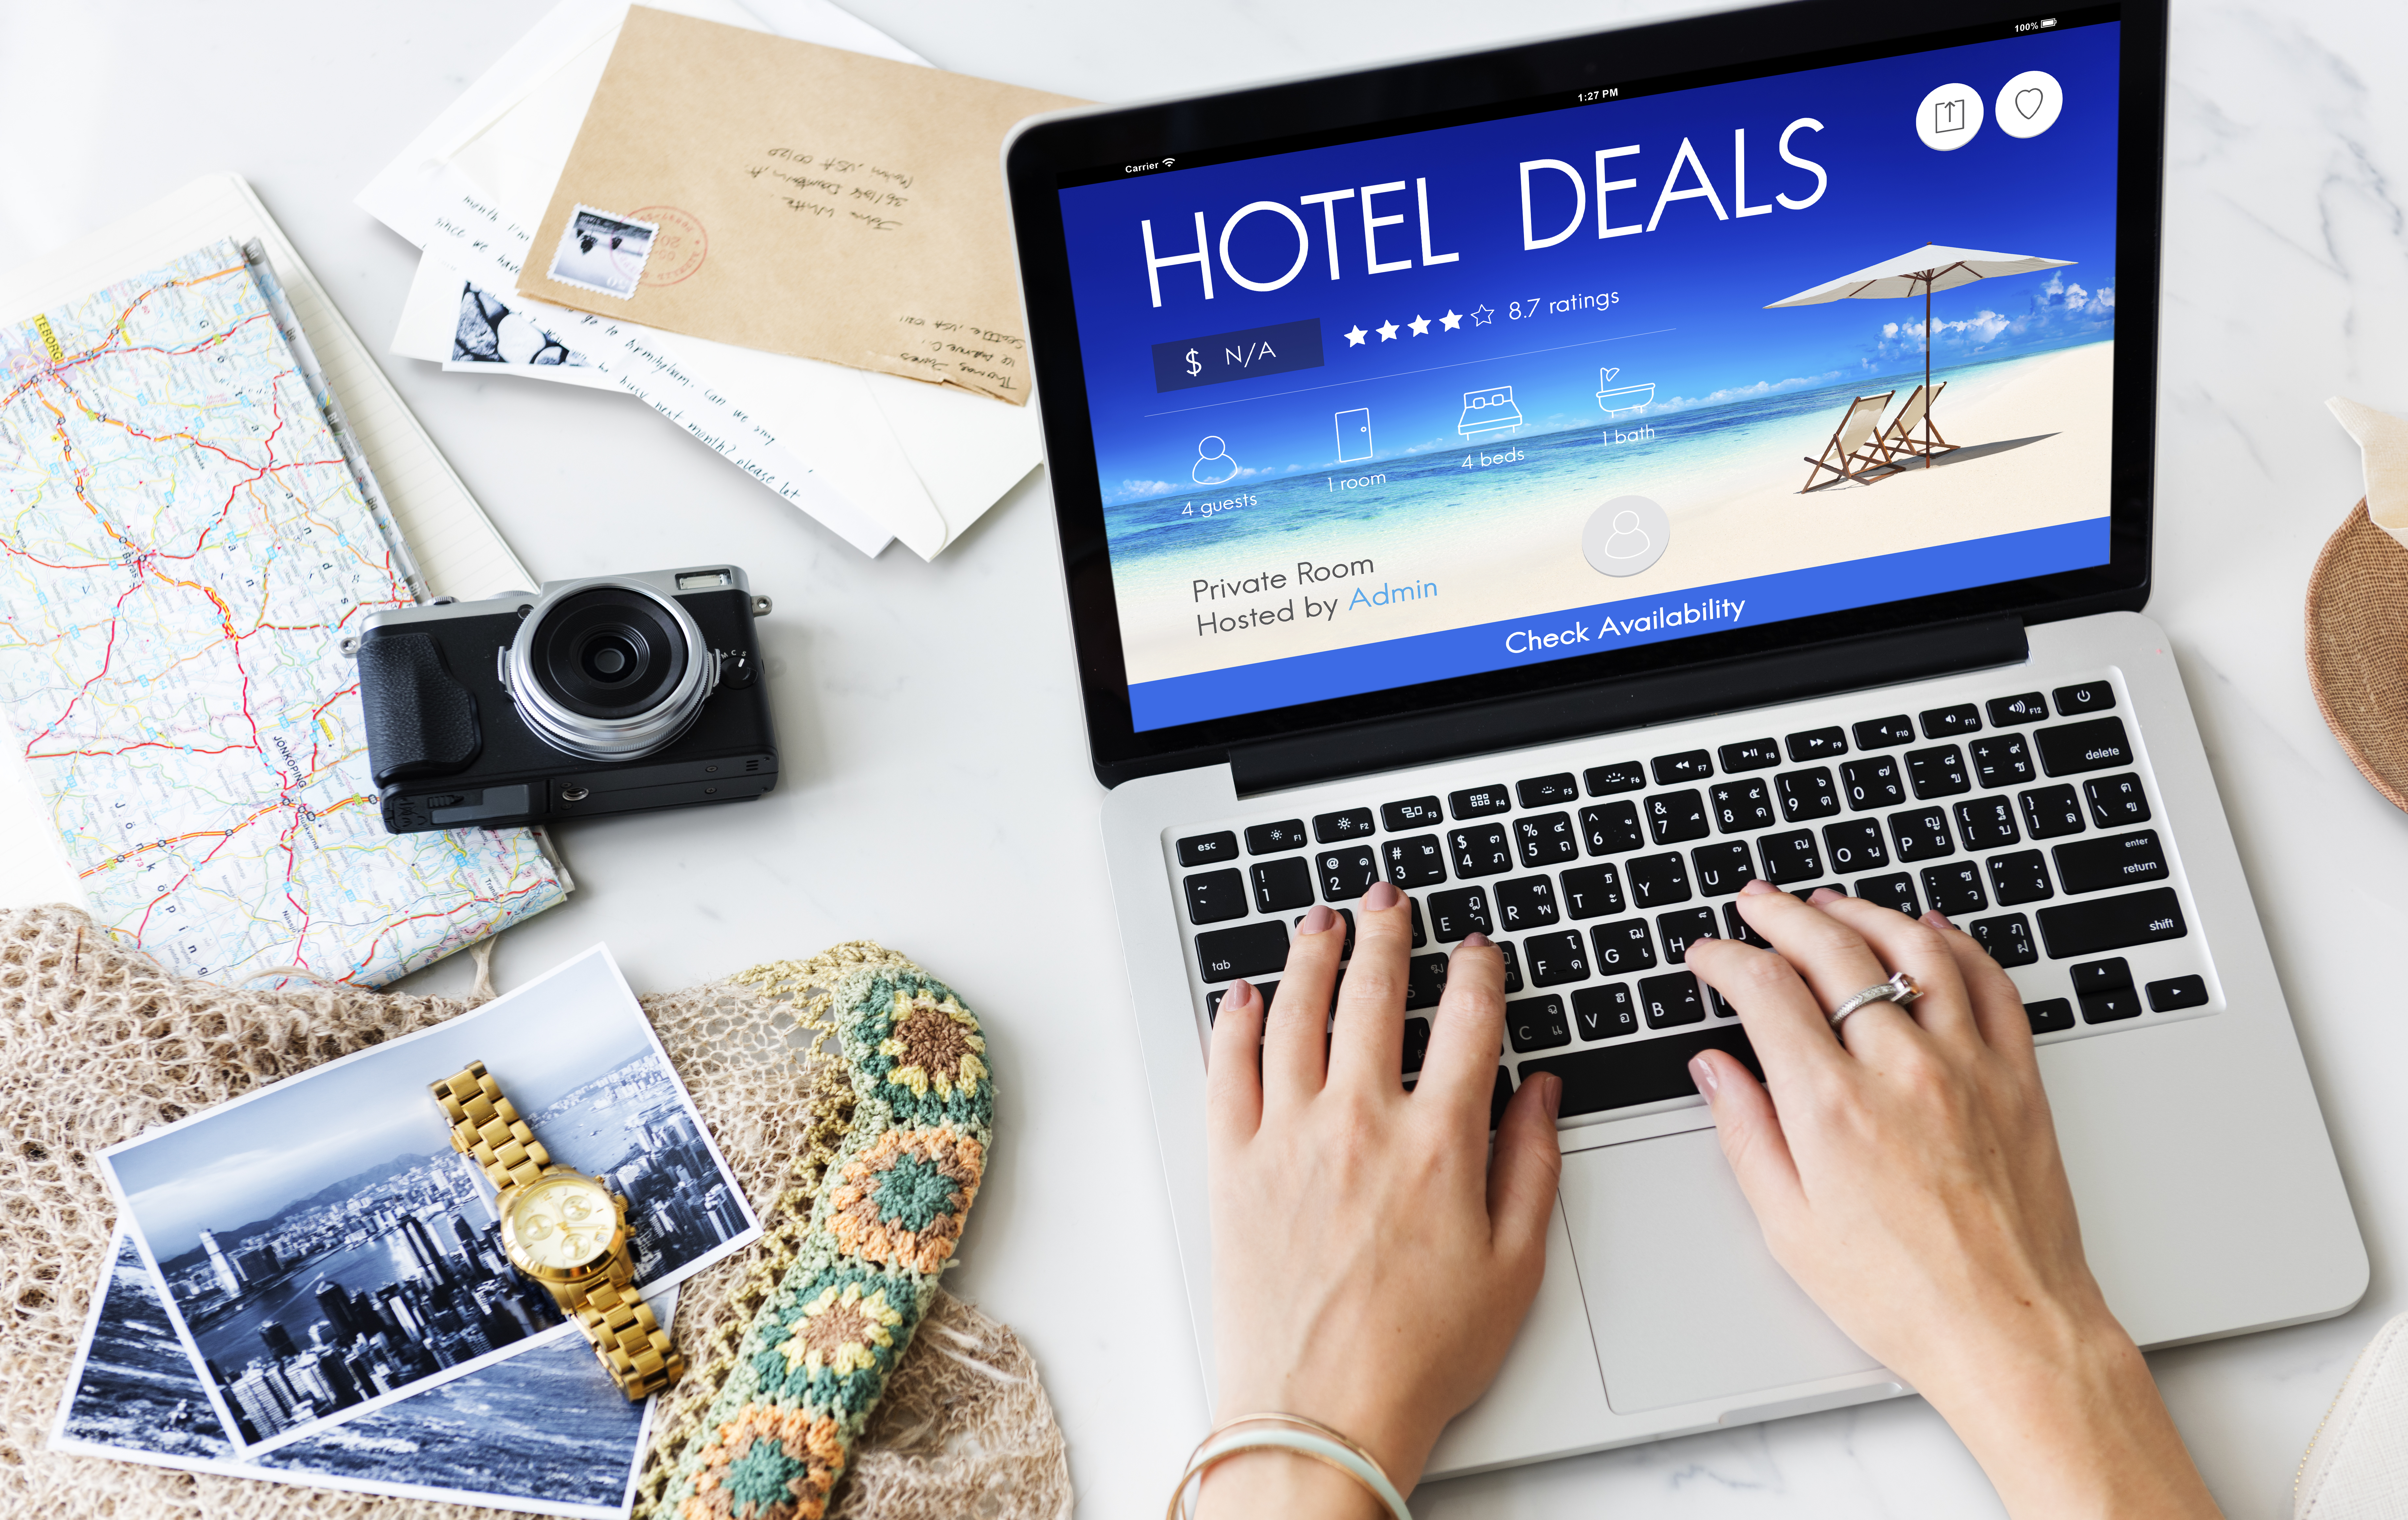 A laptop with hotel bookings | Source: Shutterstock